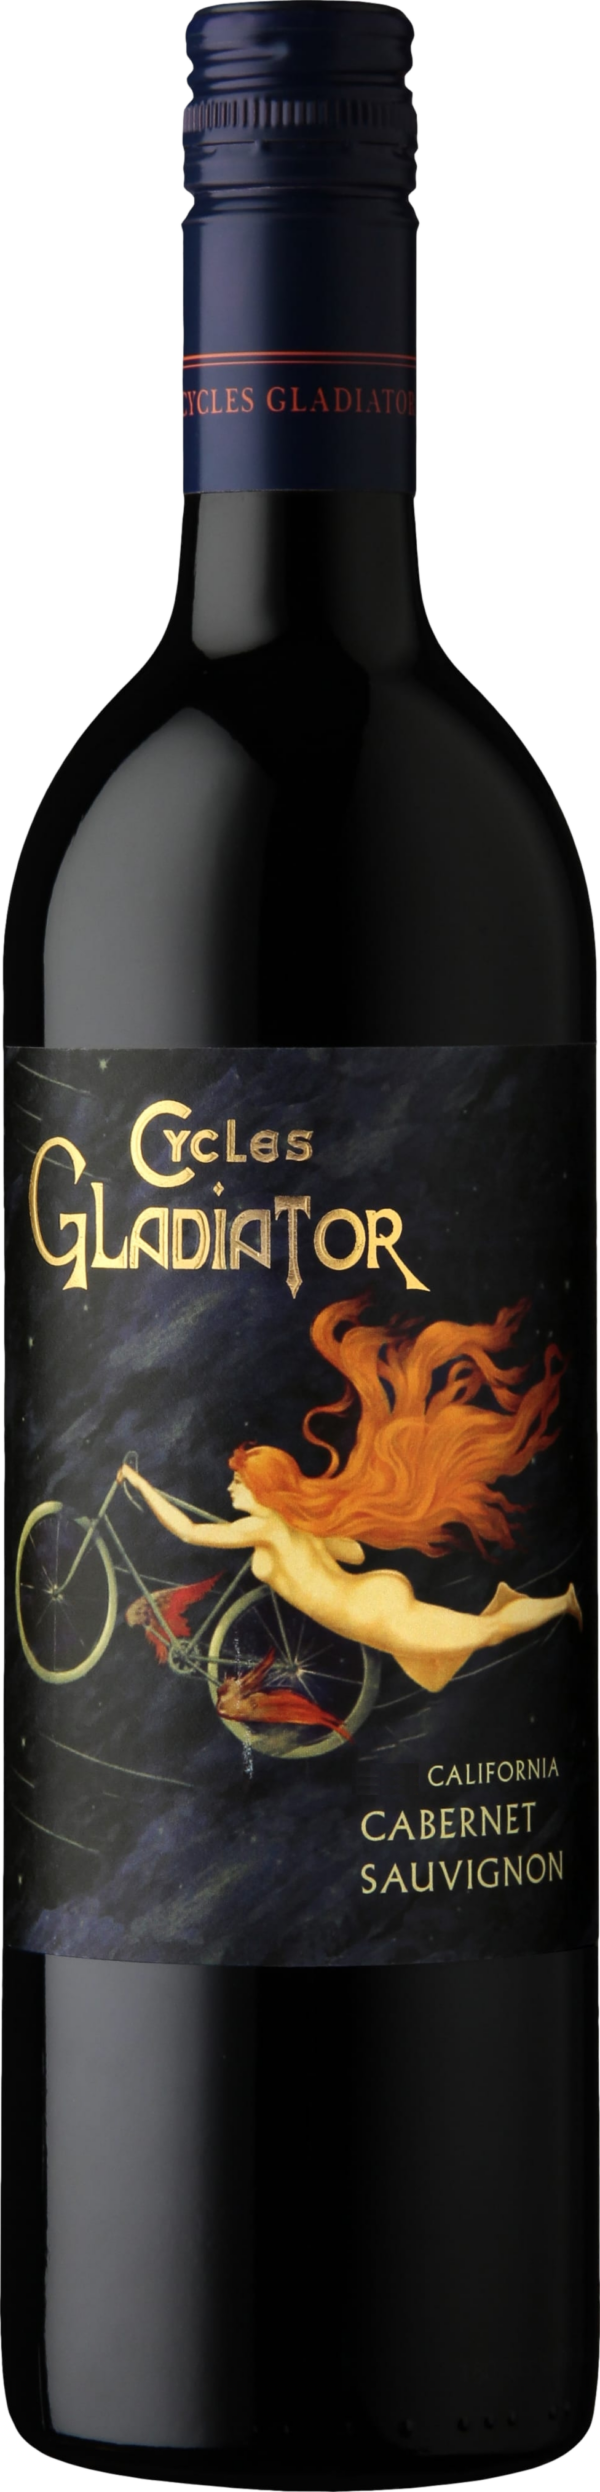 Product image of Cycles Gladiator Cabernet Sauvignon 2018 from 8wines